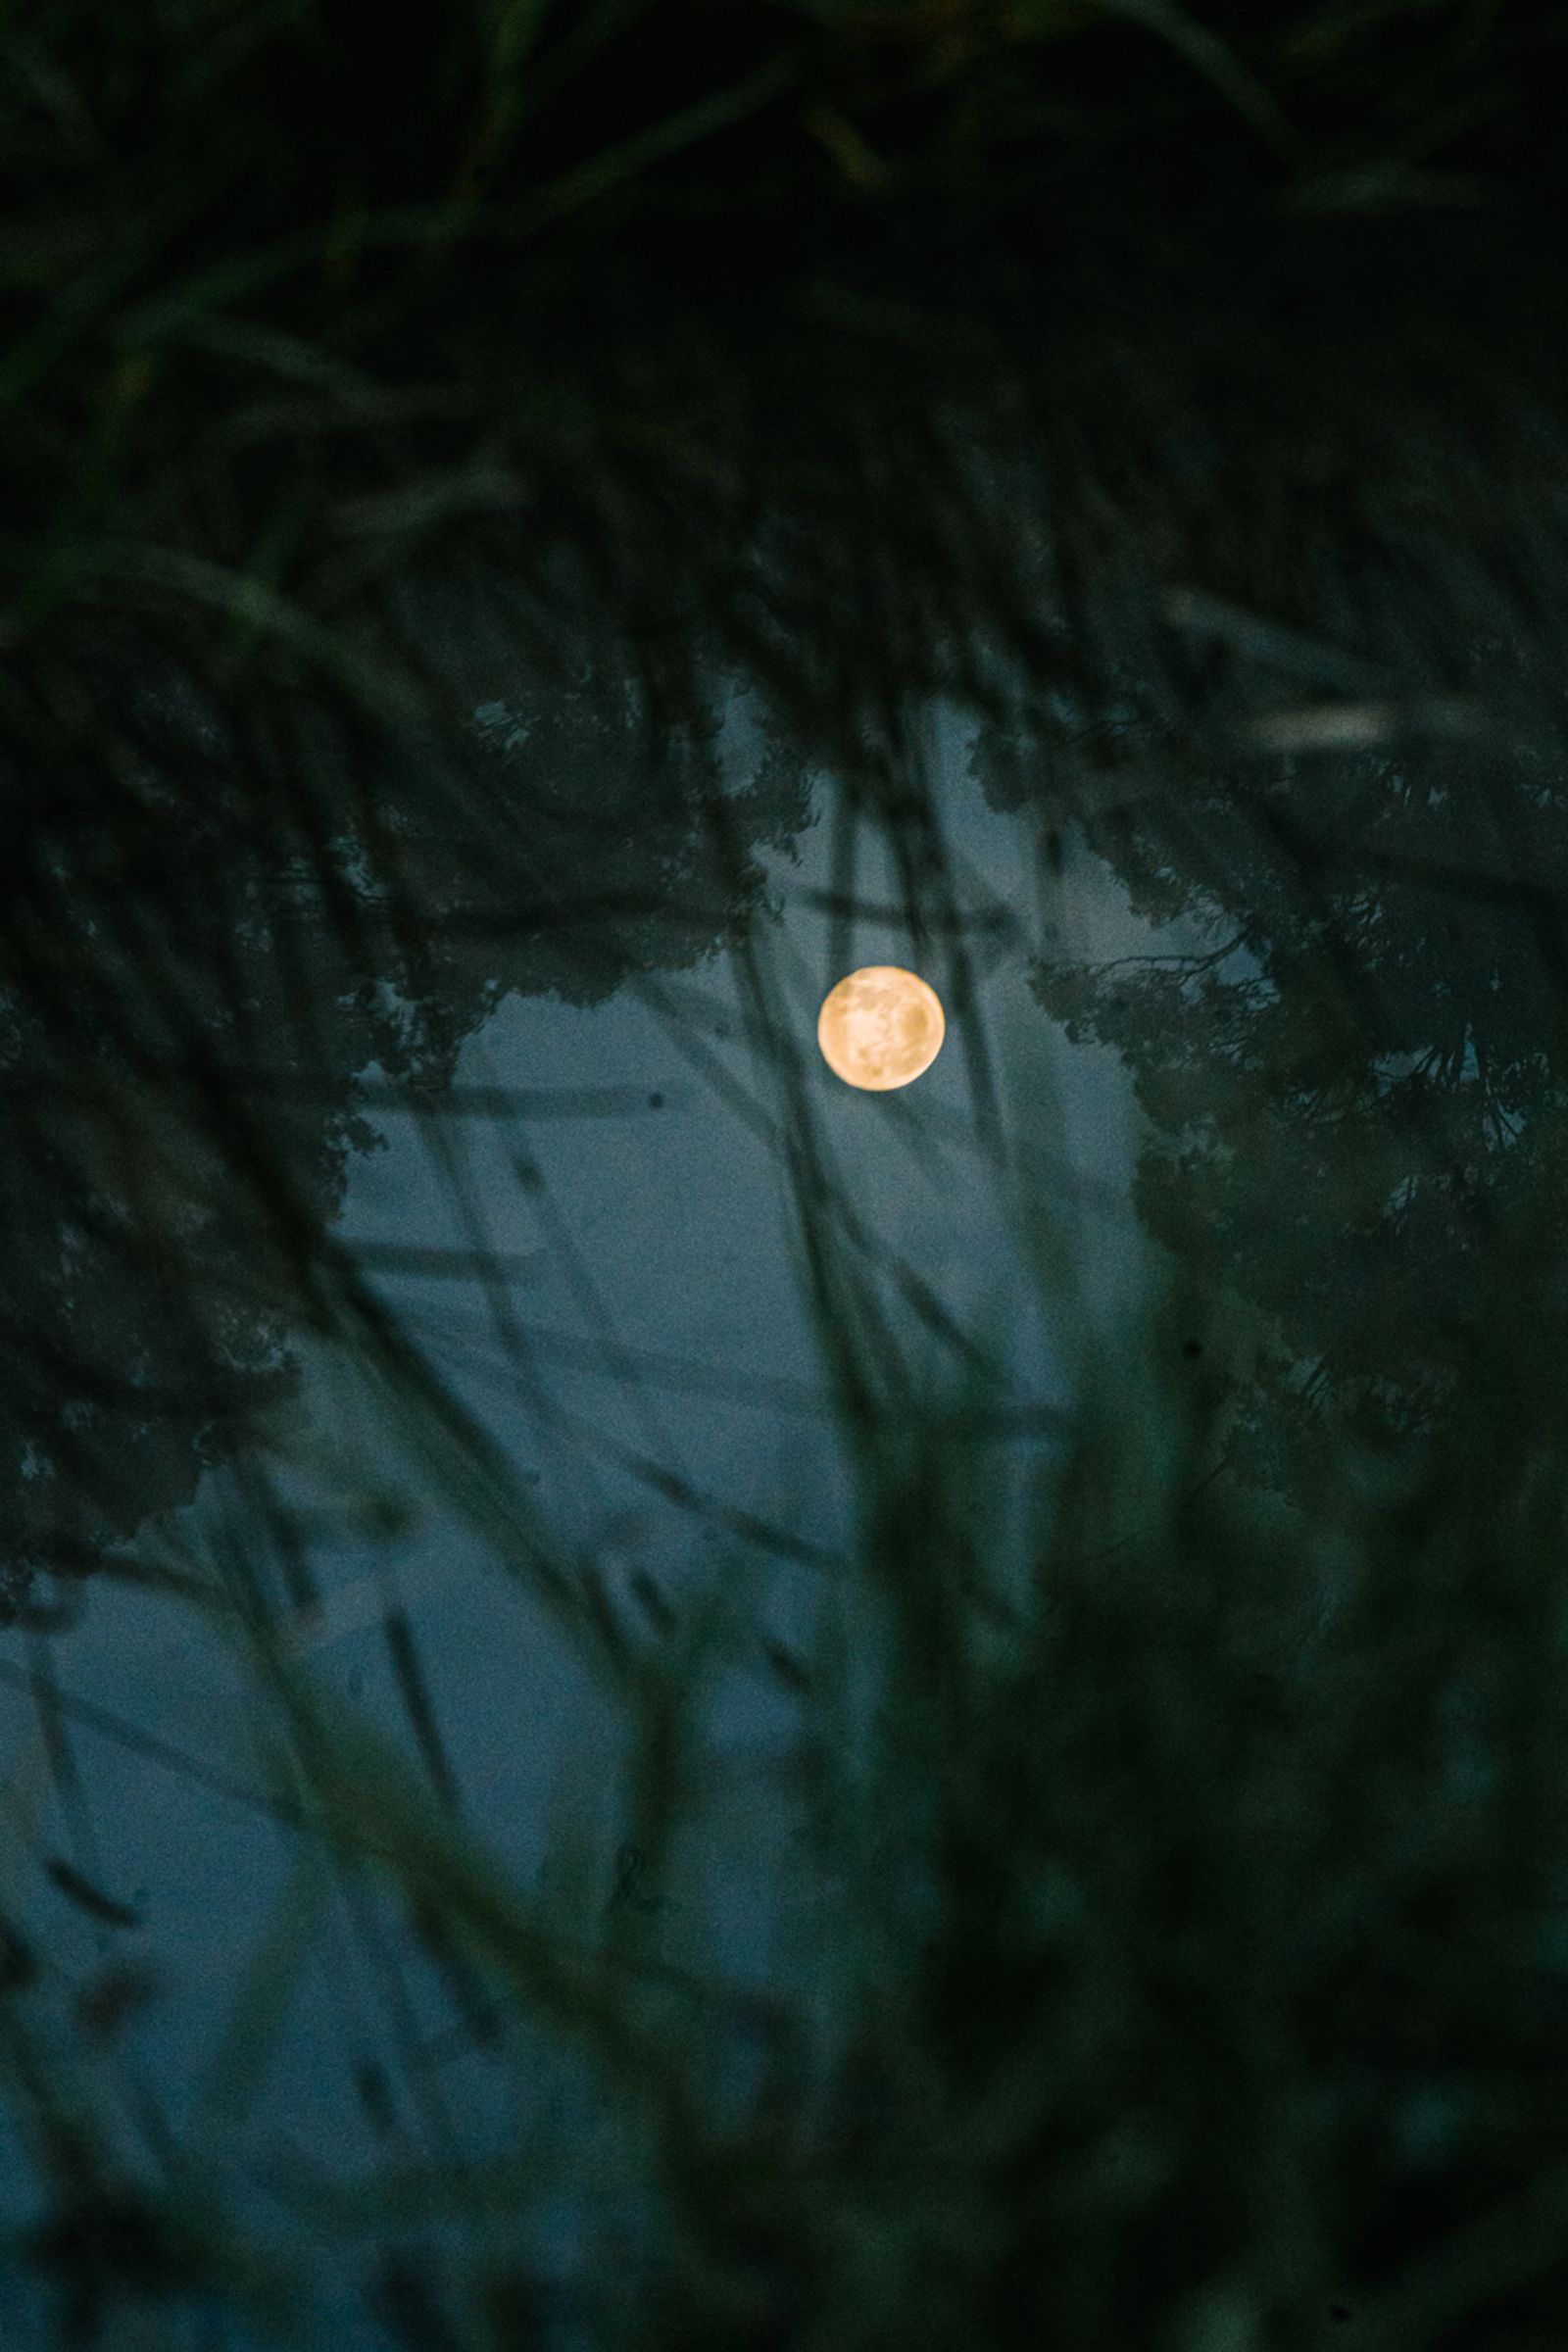 © Tajette O'halloran - The reflection of the full moon in the water